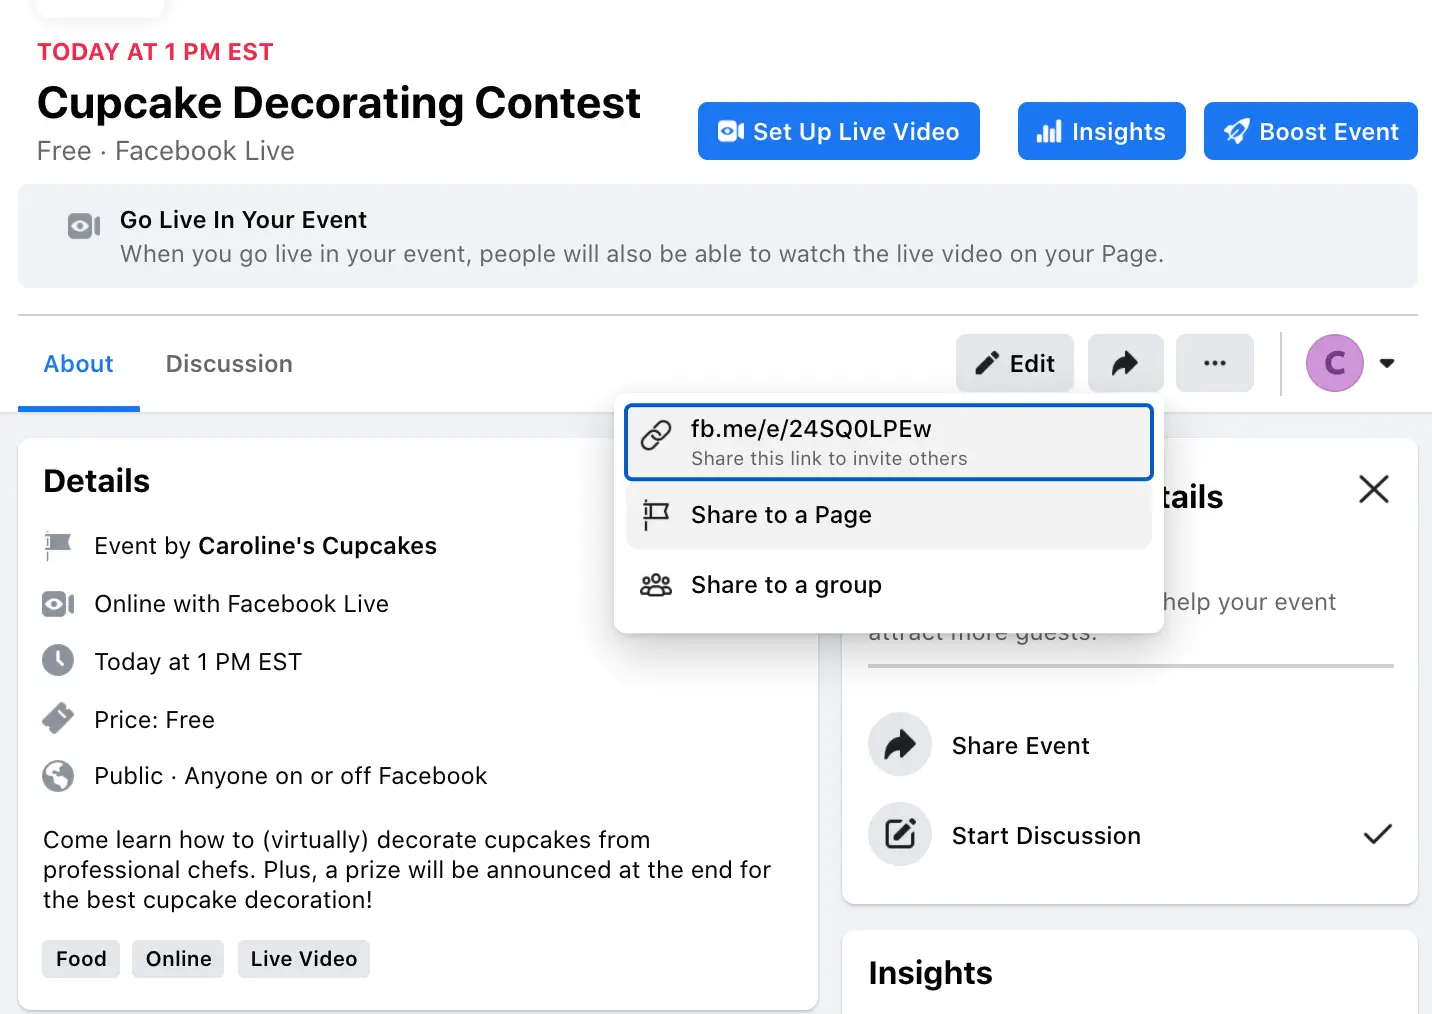 Effective Ways to Promote an Event on Facebook